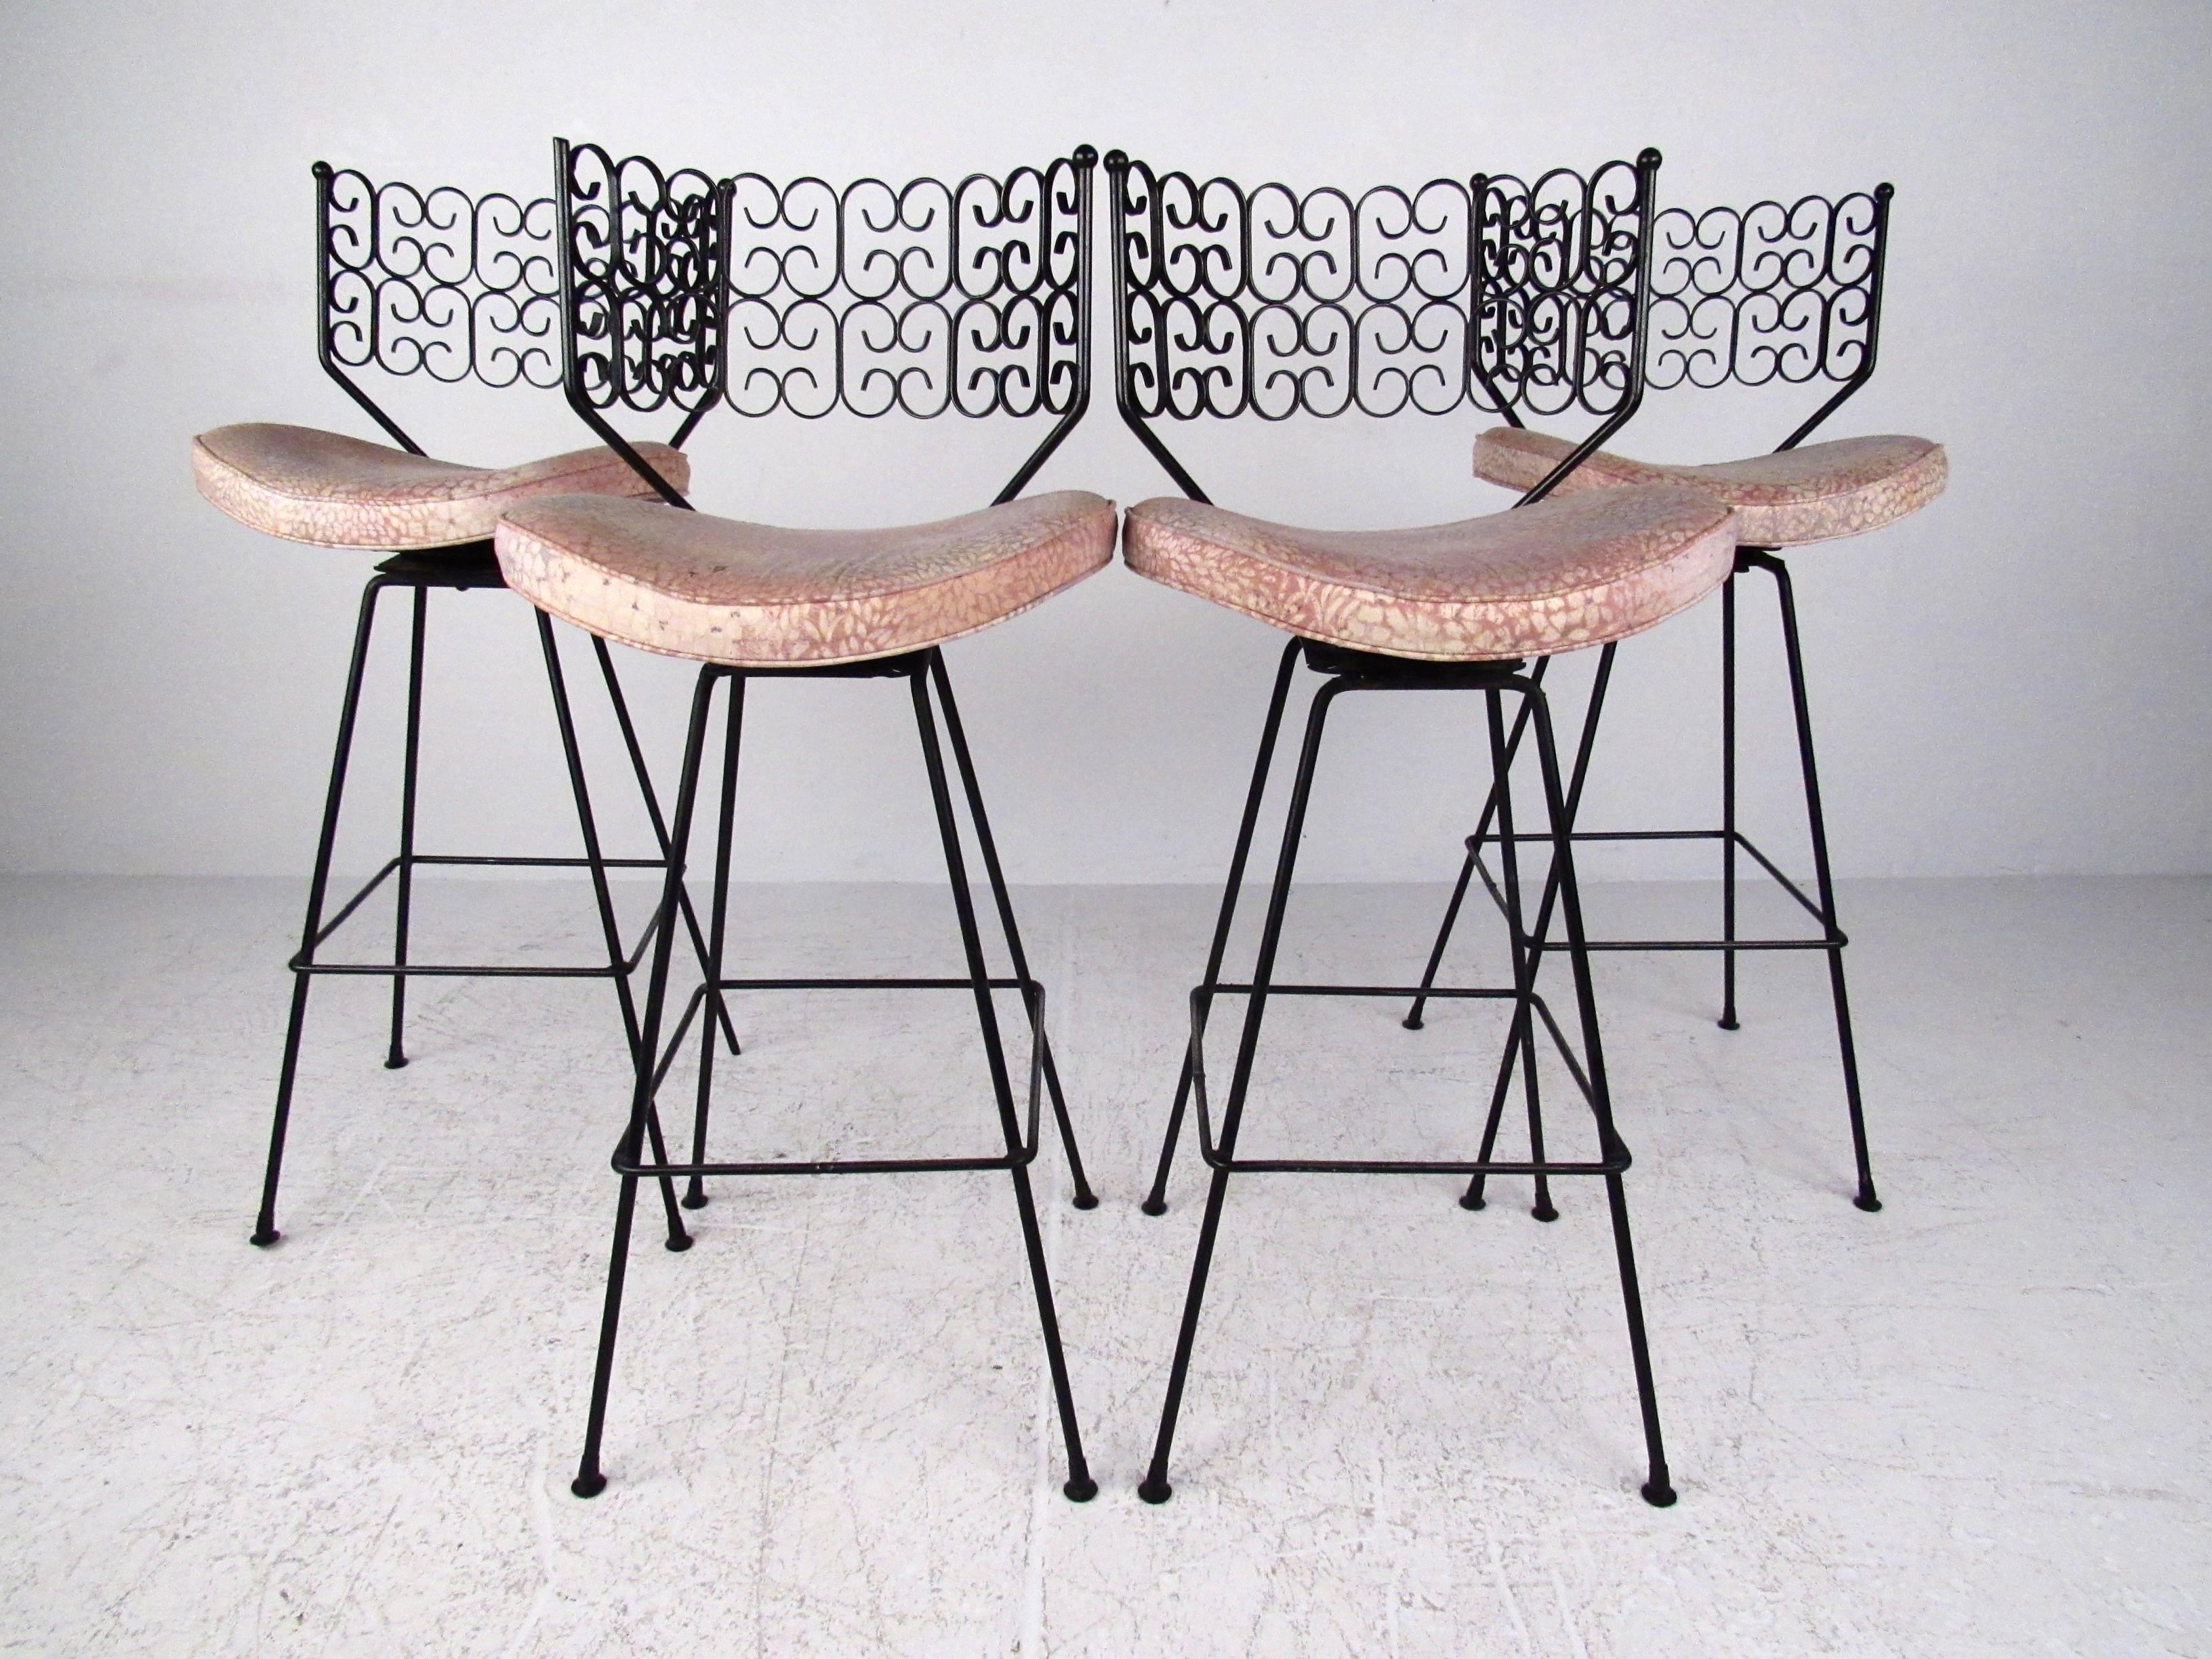 This stylish set of four metal swivel stools feature intricate details and a comfortable design, perfected by Mid-Century master Arthur Umanoff for the Boyeur Scott Furniture company. Part of his Granada line, this matching set makes a unique